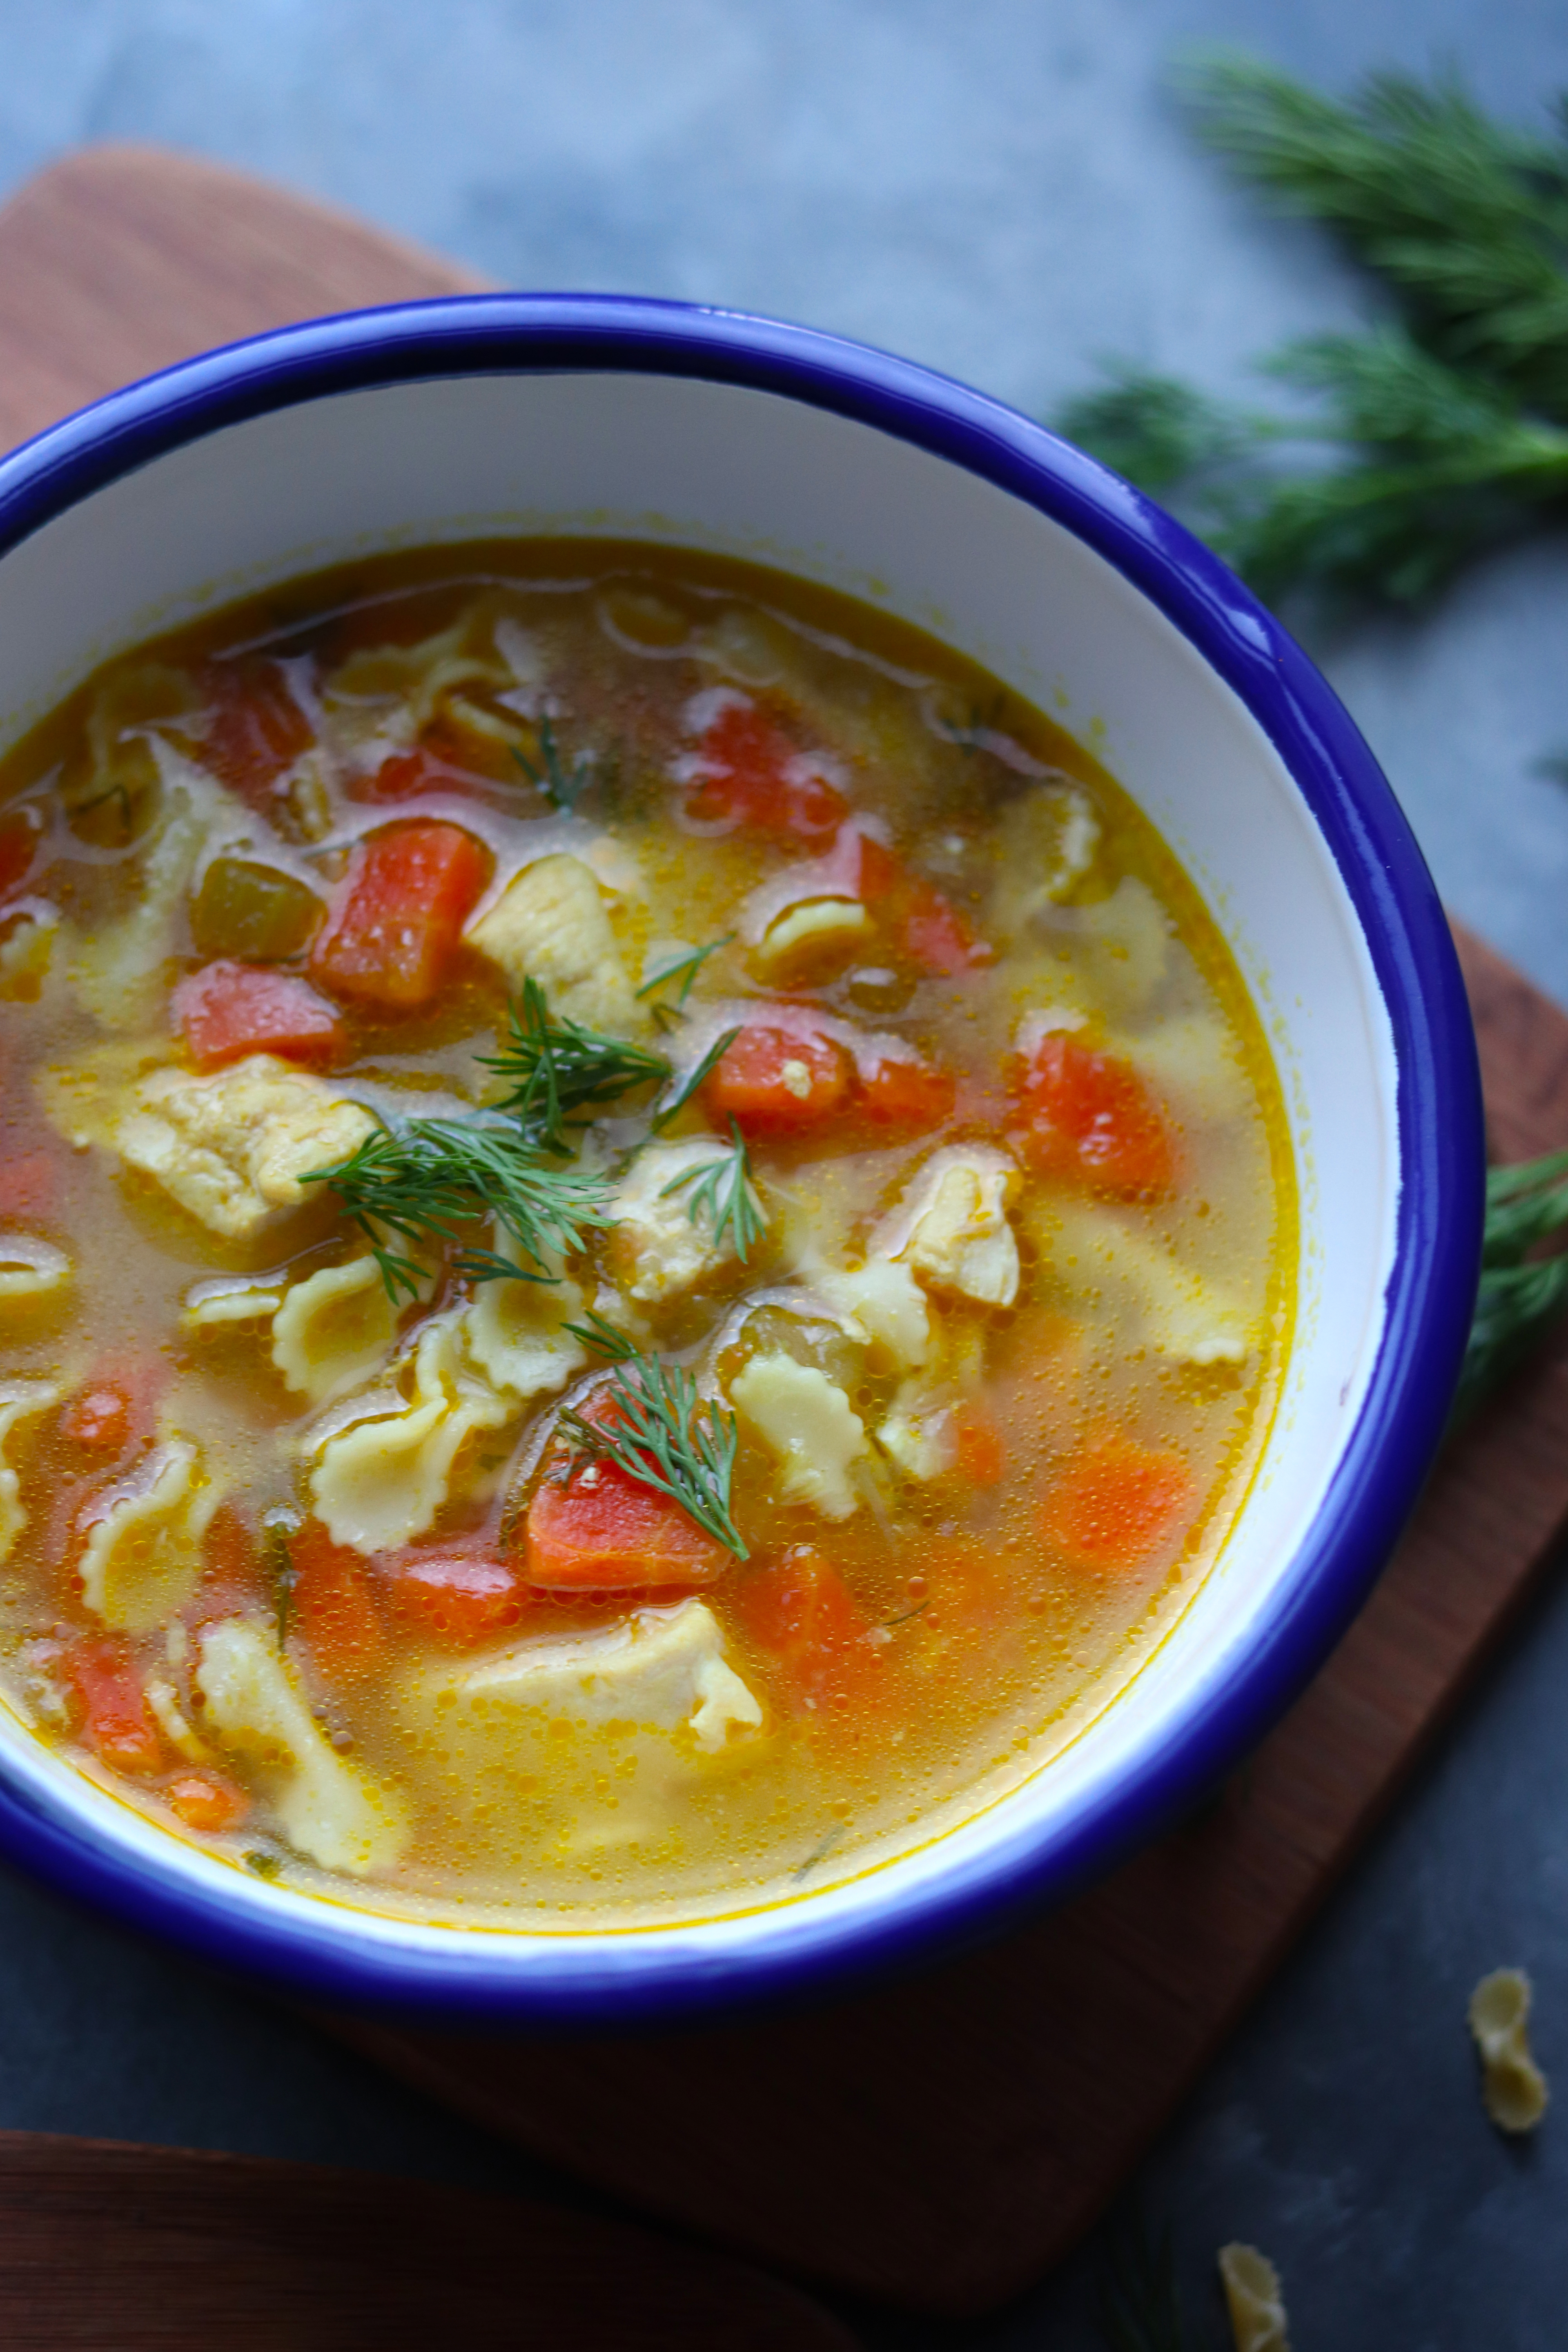 Chicken and veggies pasta soup